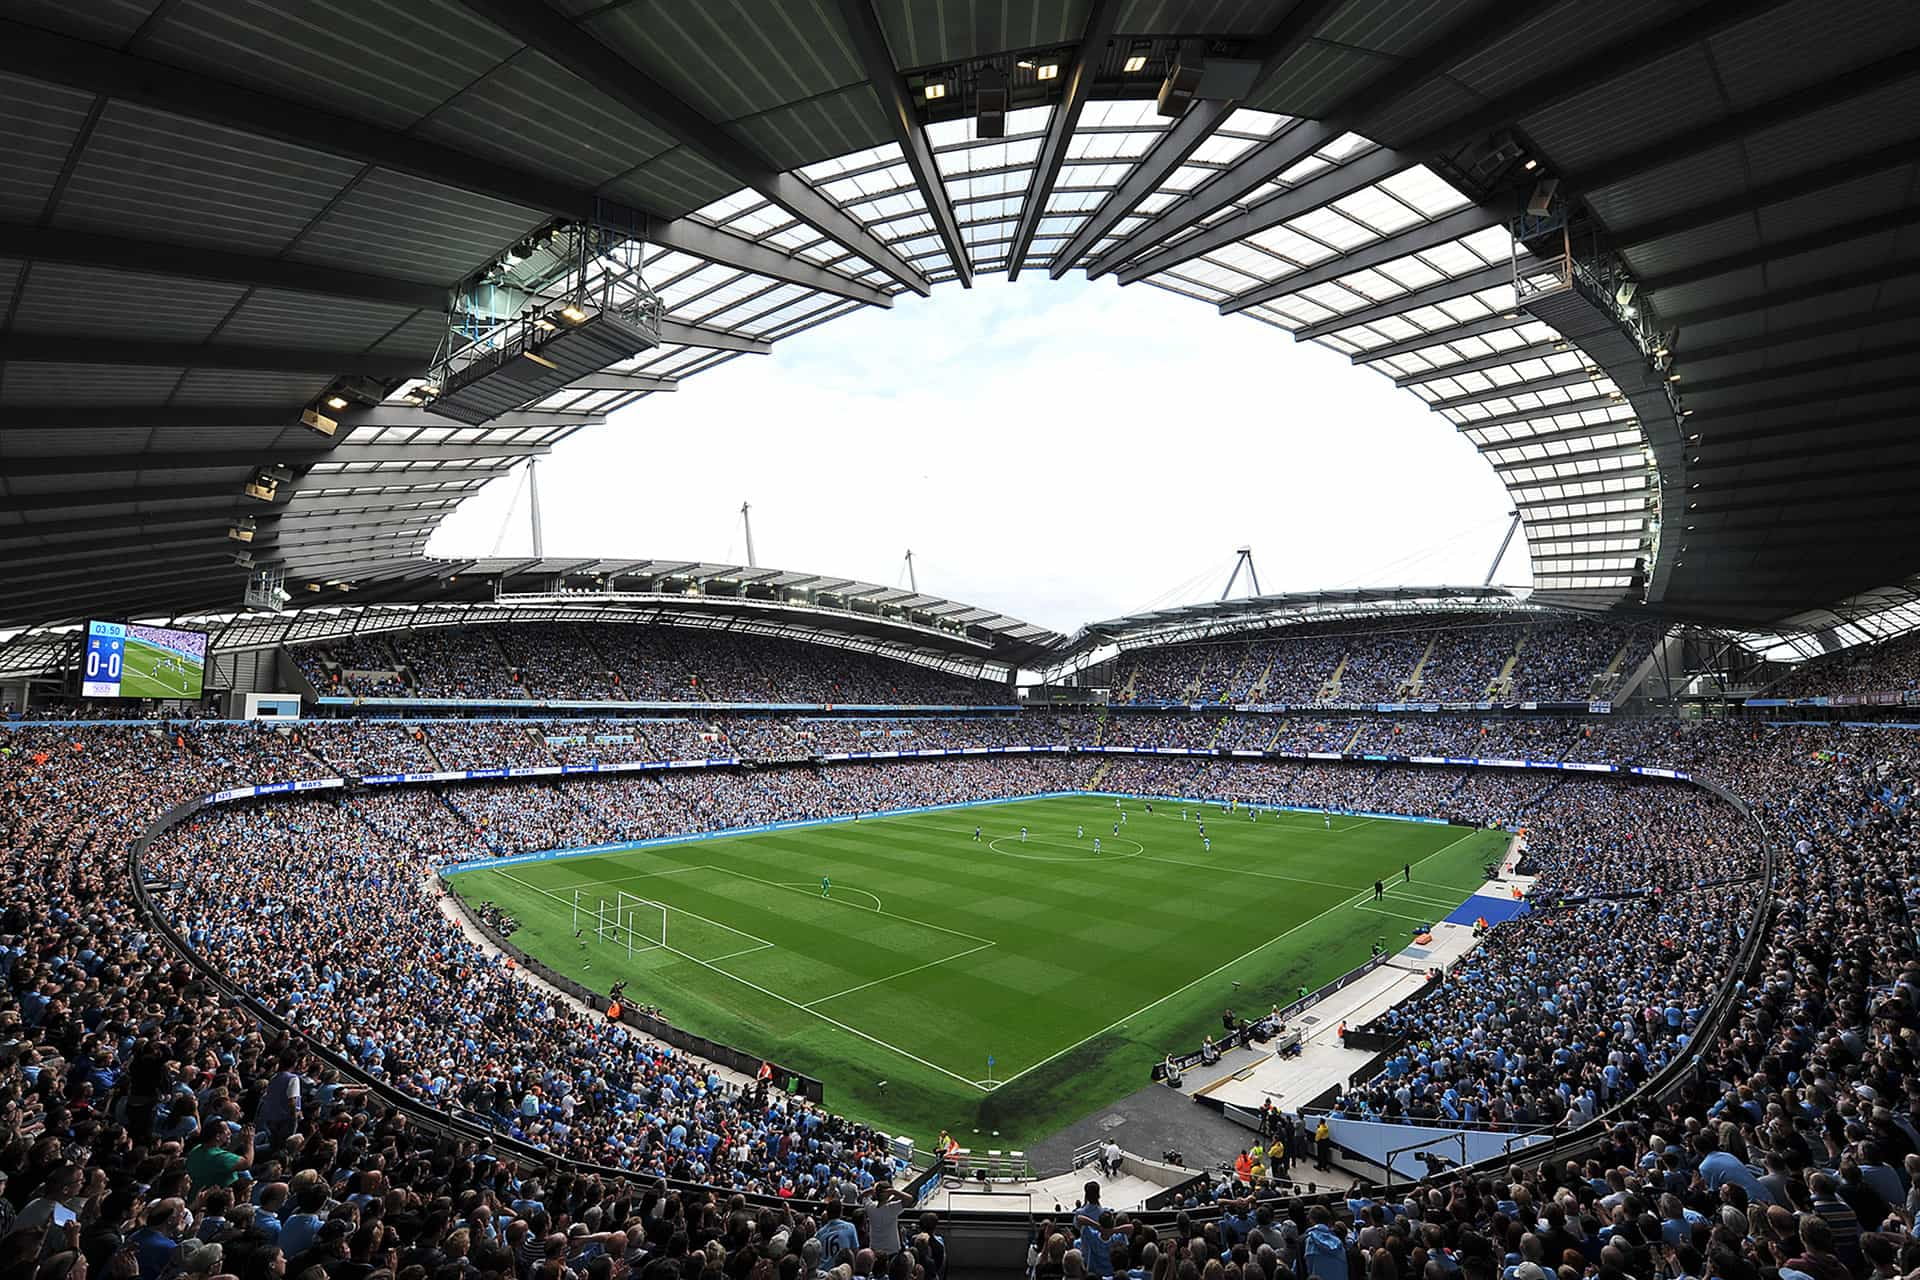 Manchester City - BSC Young Boys (CL), 2 novemberom 20:00